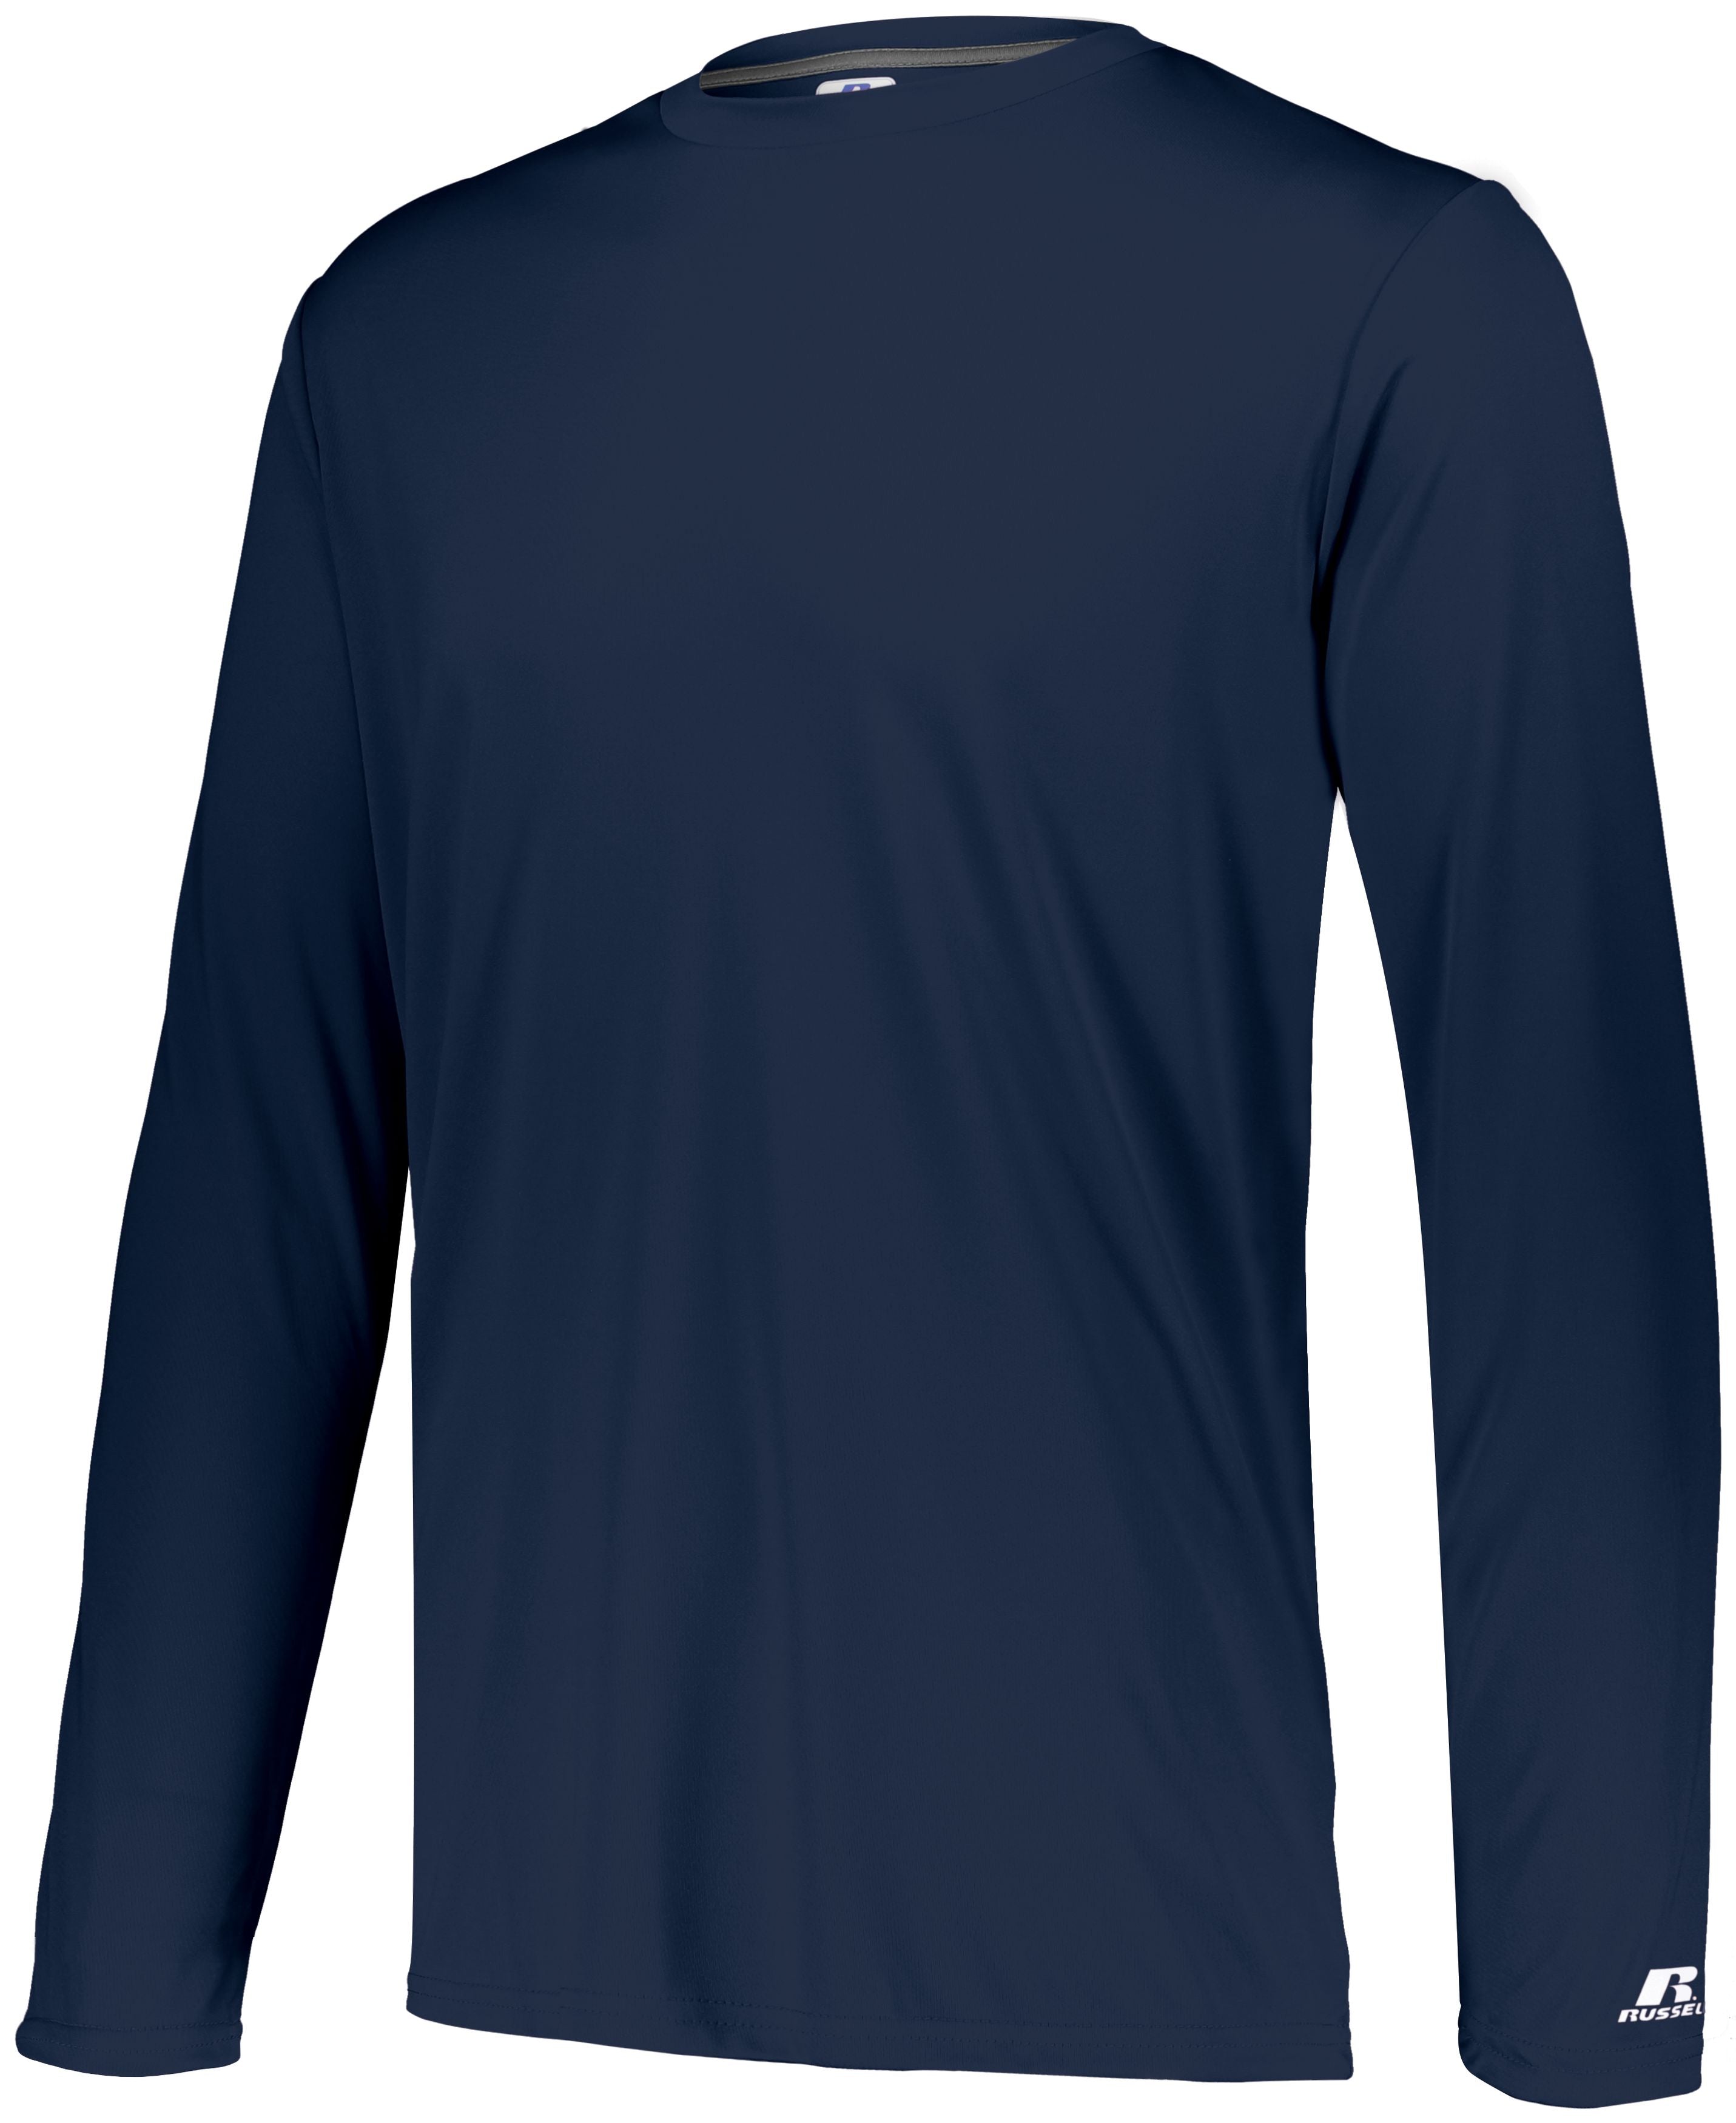 Russell Athletic Dri-Power Core Performance Long Sleeve Tee in Navy  -Part of the Adult, Adult-Tee-Shirt, T-Shirts, Russell-Athletic-Products, Shirts product lines at KanaleyCreations.com